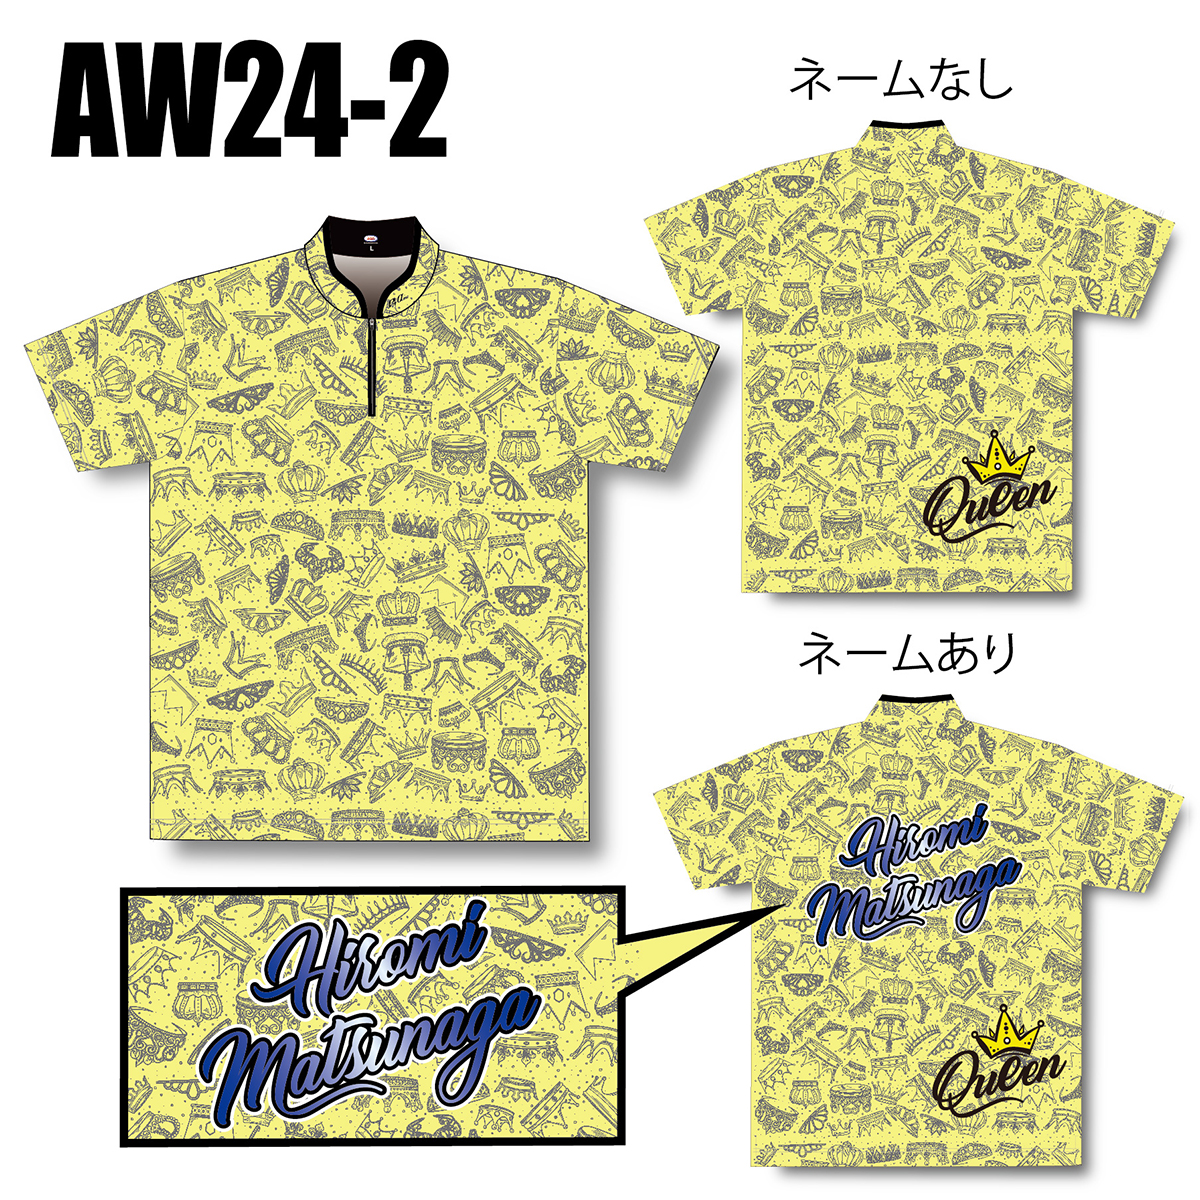 TEAM QUEENモデル(AW24-2・YELLOW)